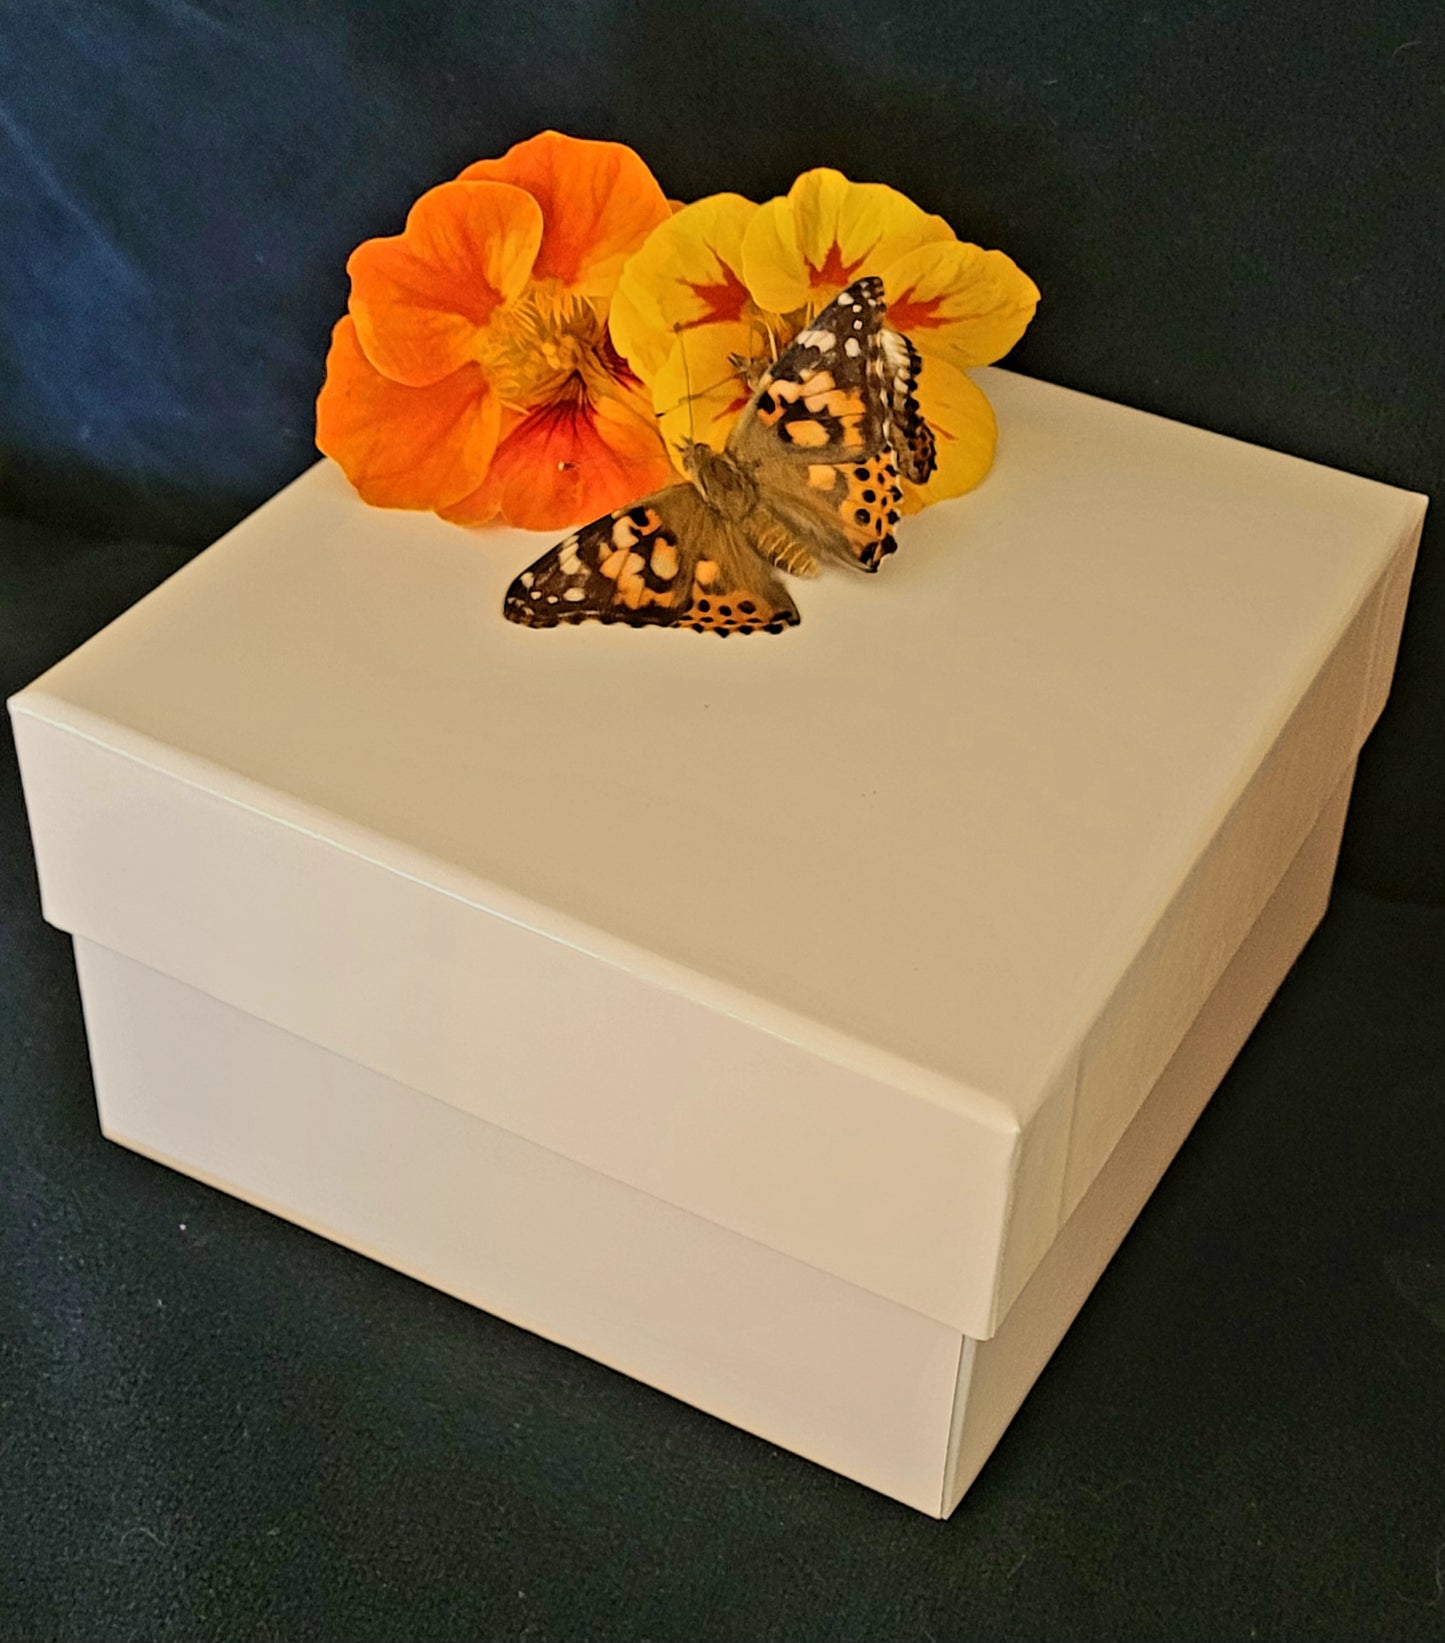 50 Painted Lady Butterflies in a Plain Mass Release Box ~ Please read IMPORTANT INFO BELOW before placing an order.